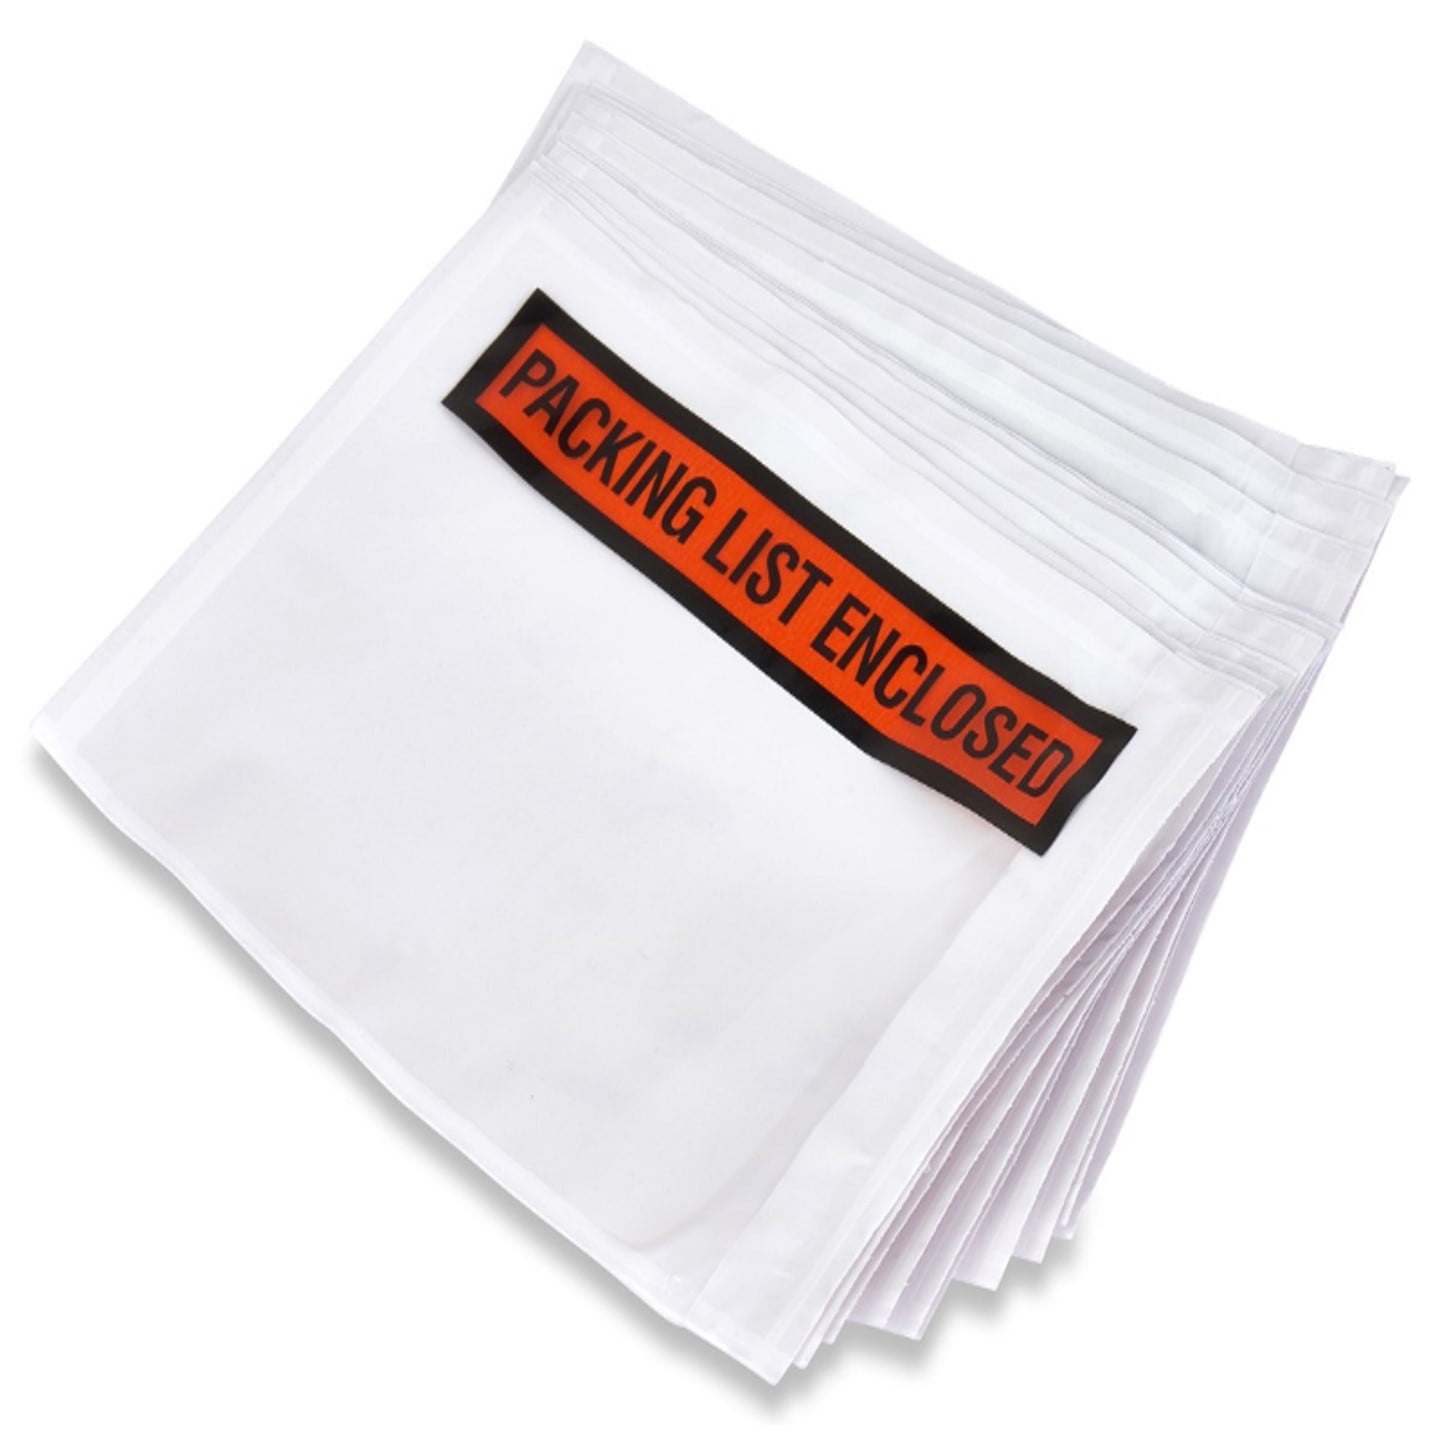 Lots of 50X 5.5" x 7" PACKING LIST ENCLOSED ENVELOPE POUCH FREE SHIPPING!! 